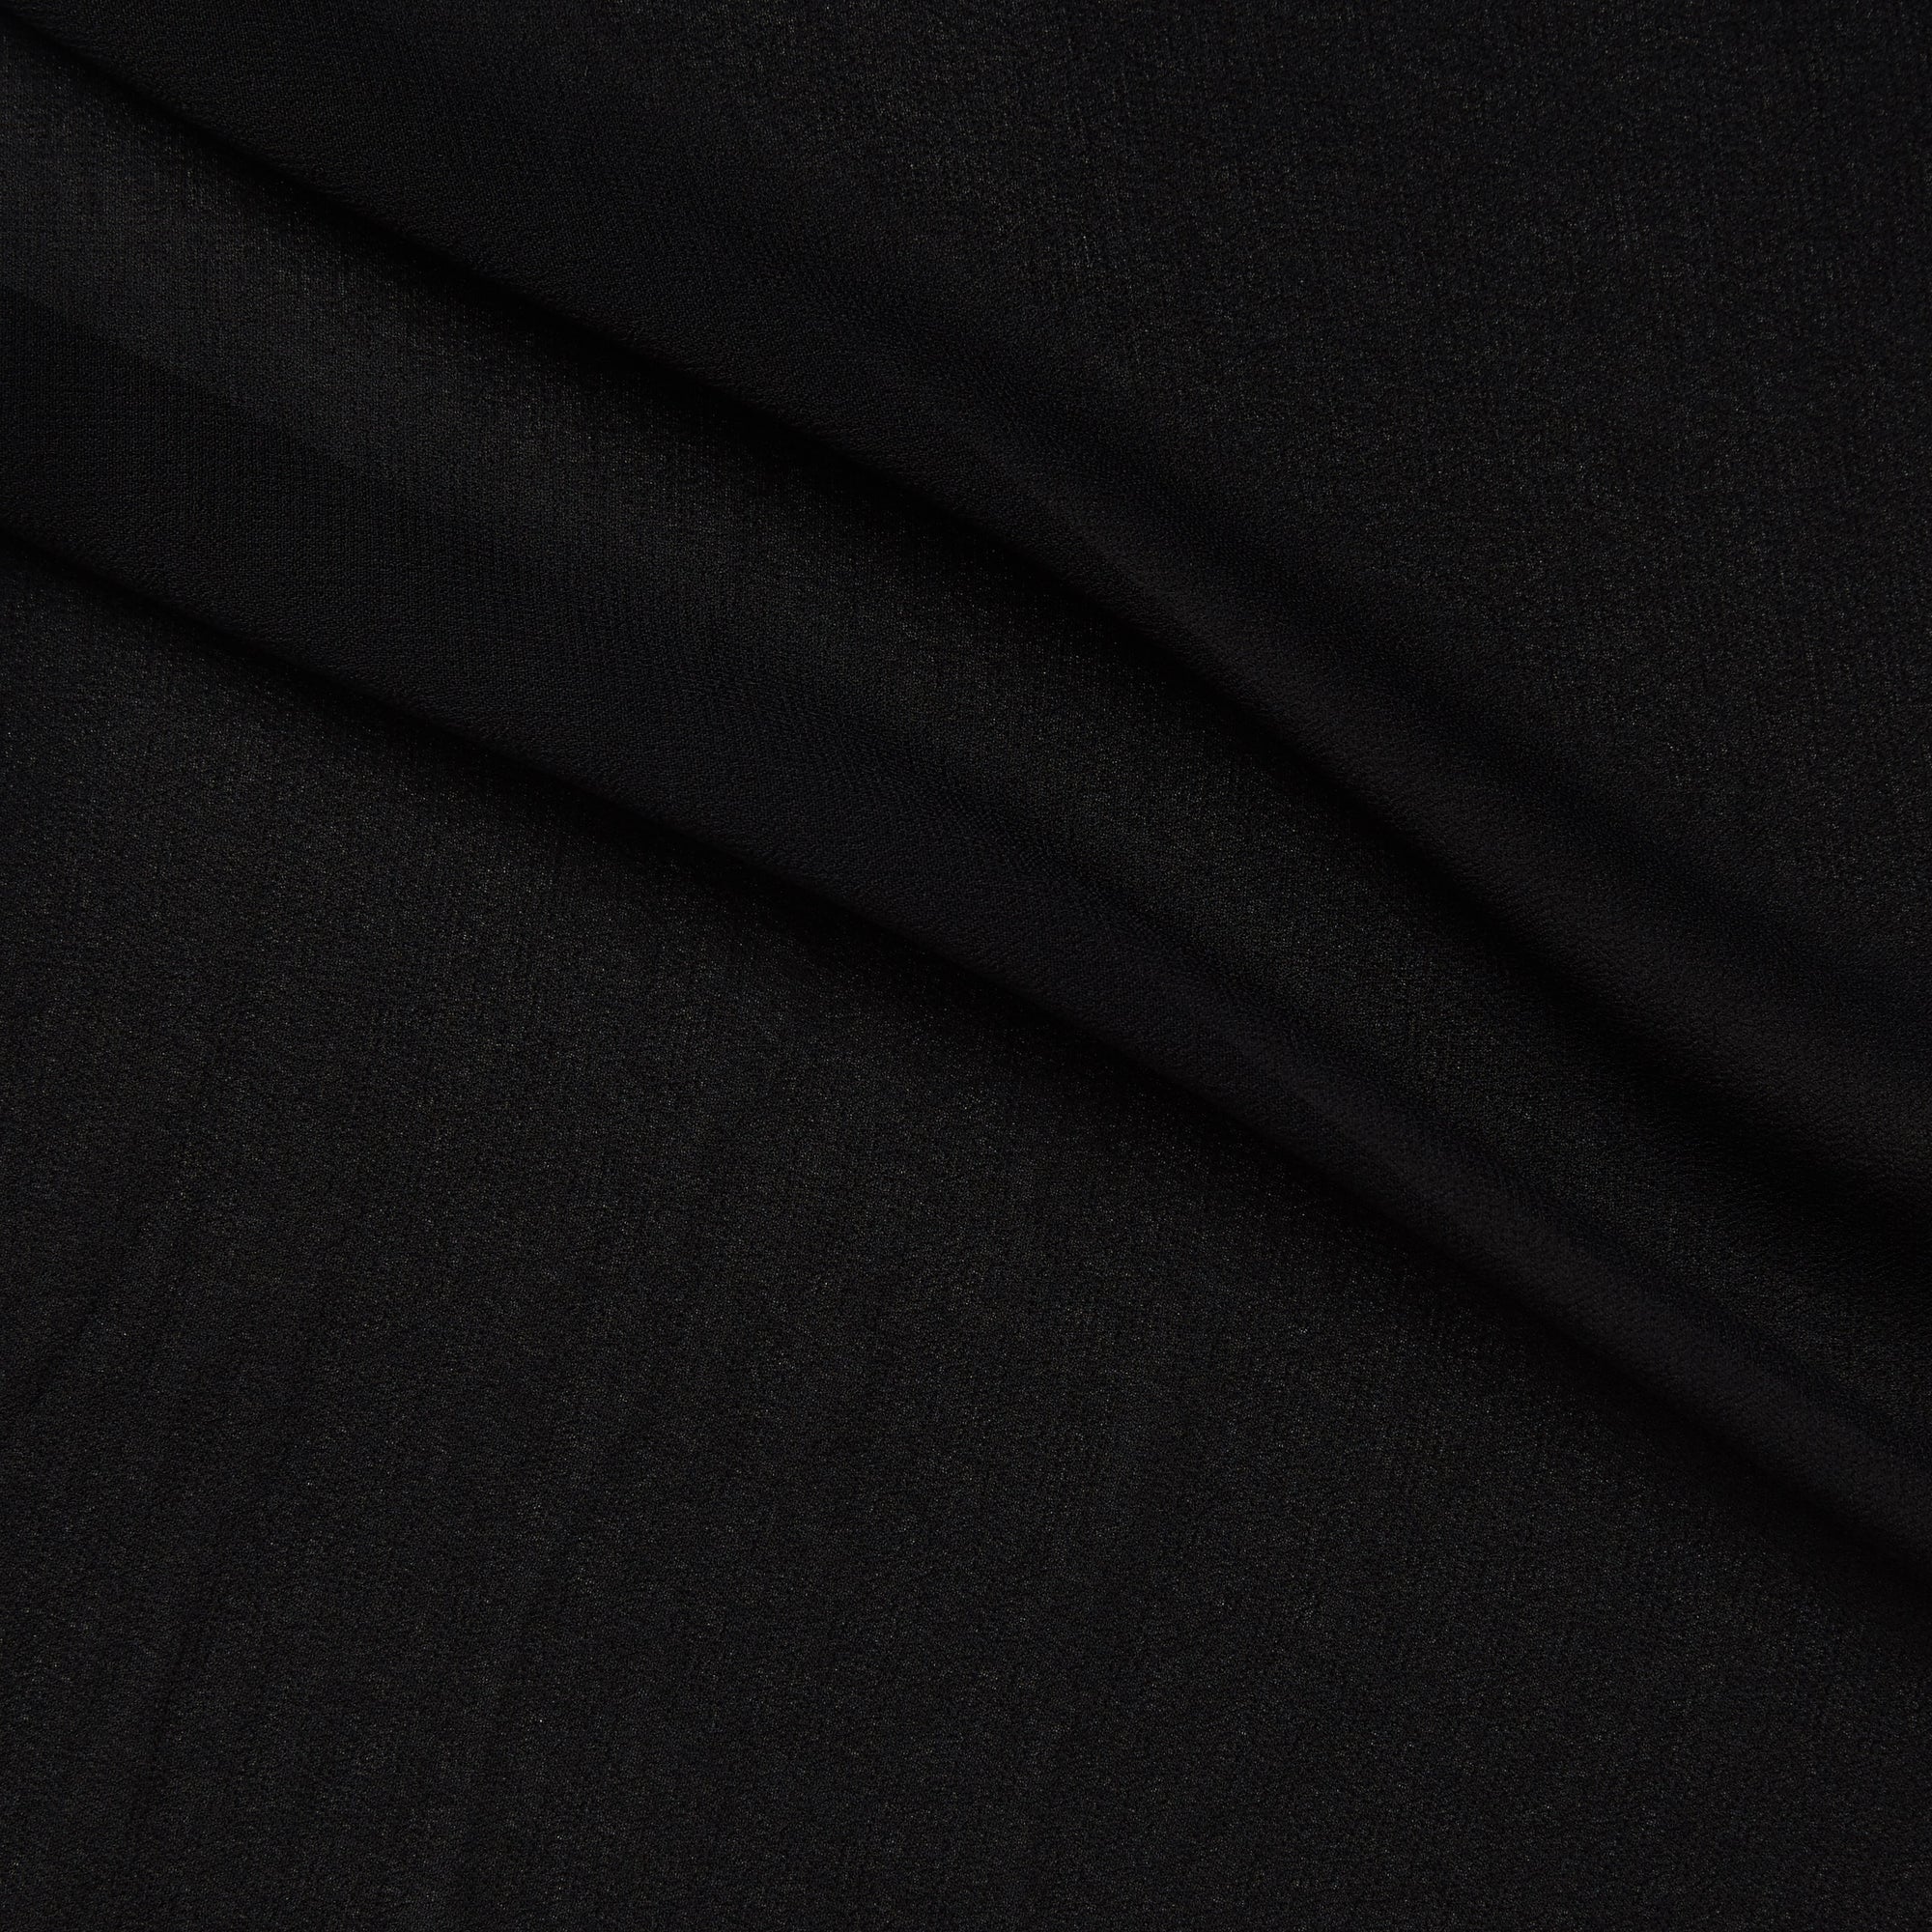 Presenting Chelsea a black colored double georgette pure viscose fabric with crinkled face and fluid drape